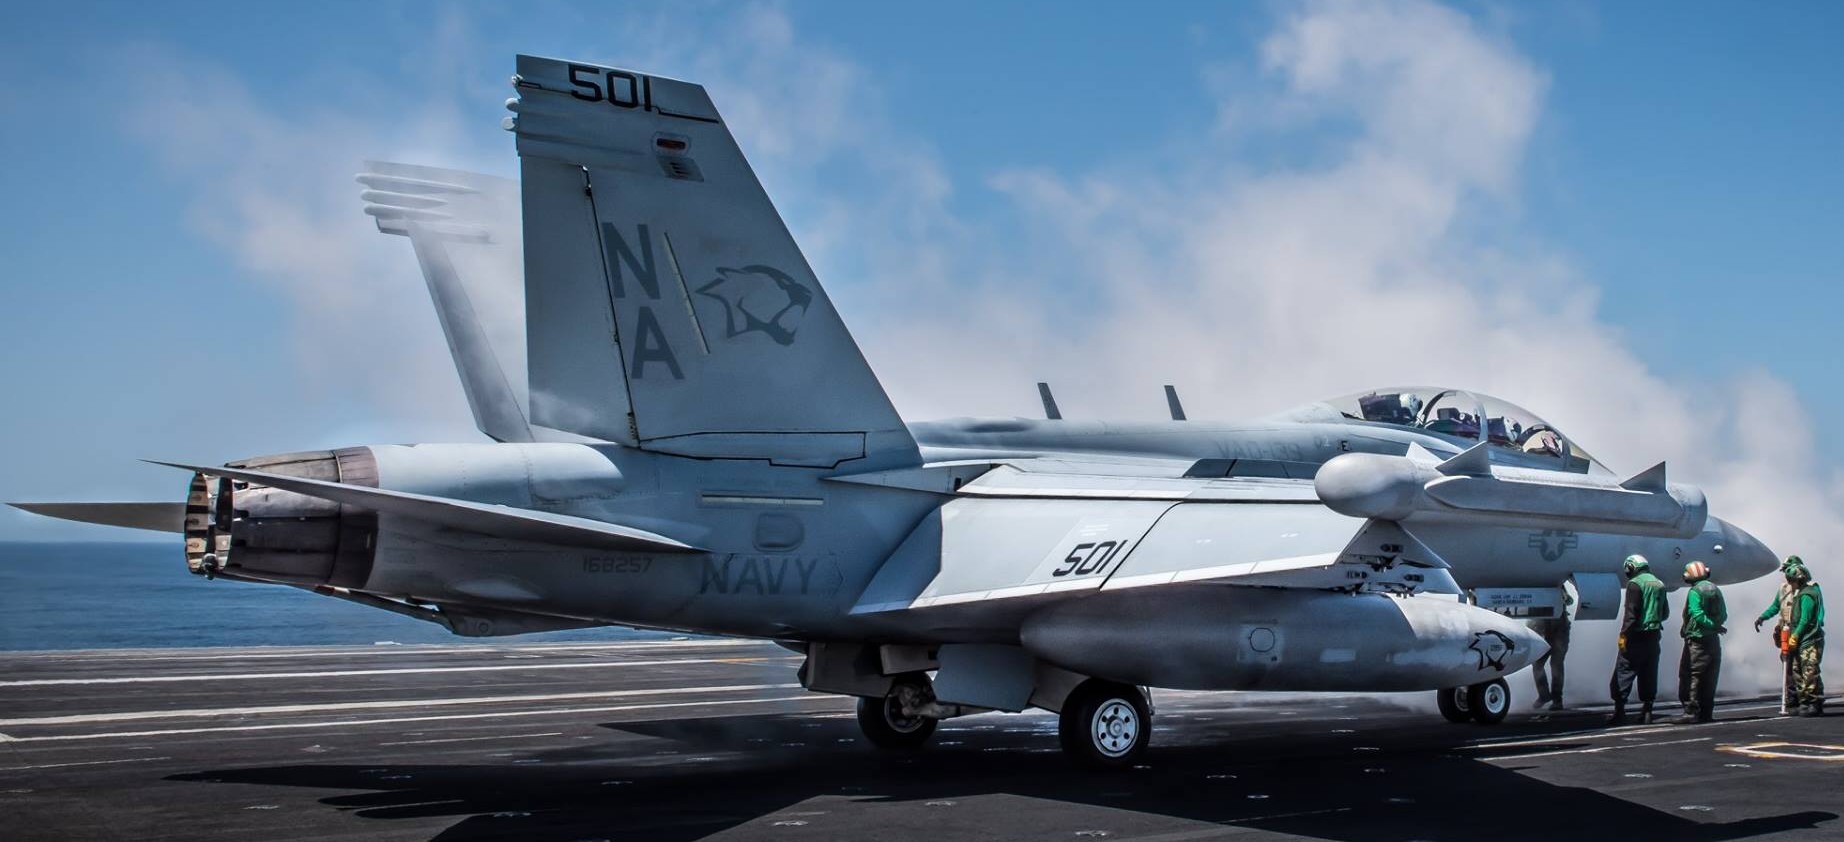 vaq-139 cougars electronic attack squadron us navy ea-18g growler cvw-17 uss theodore roosevelt cvn-71 82